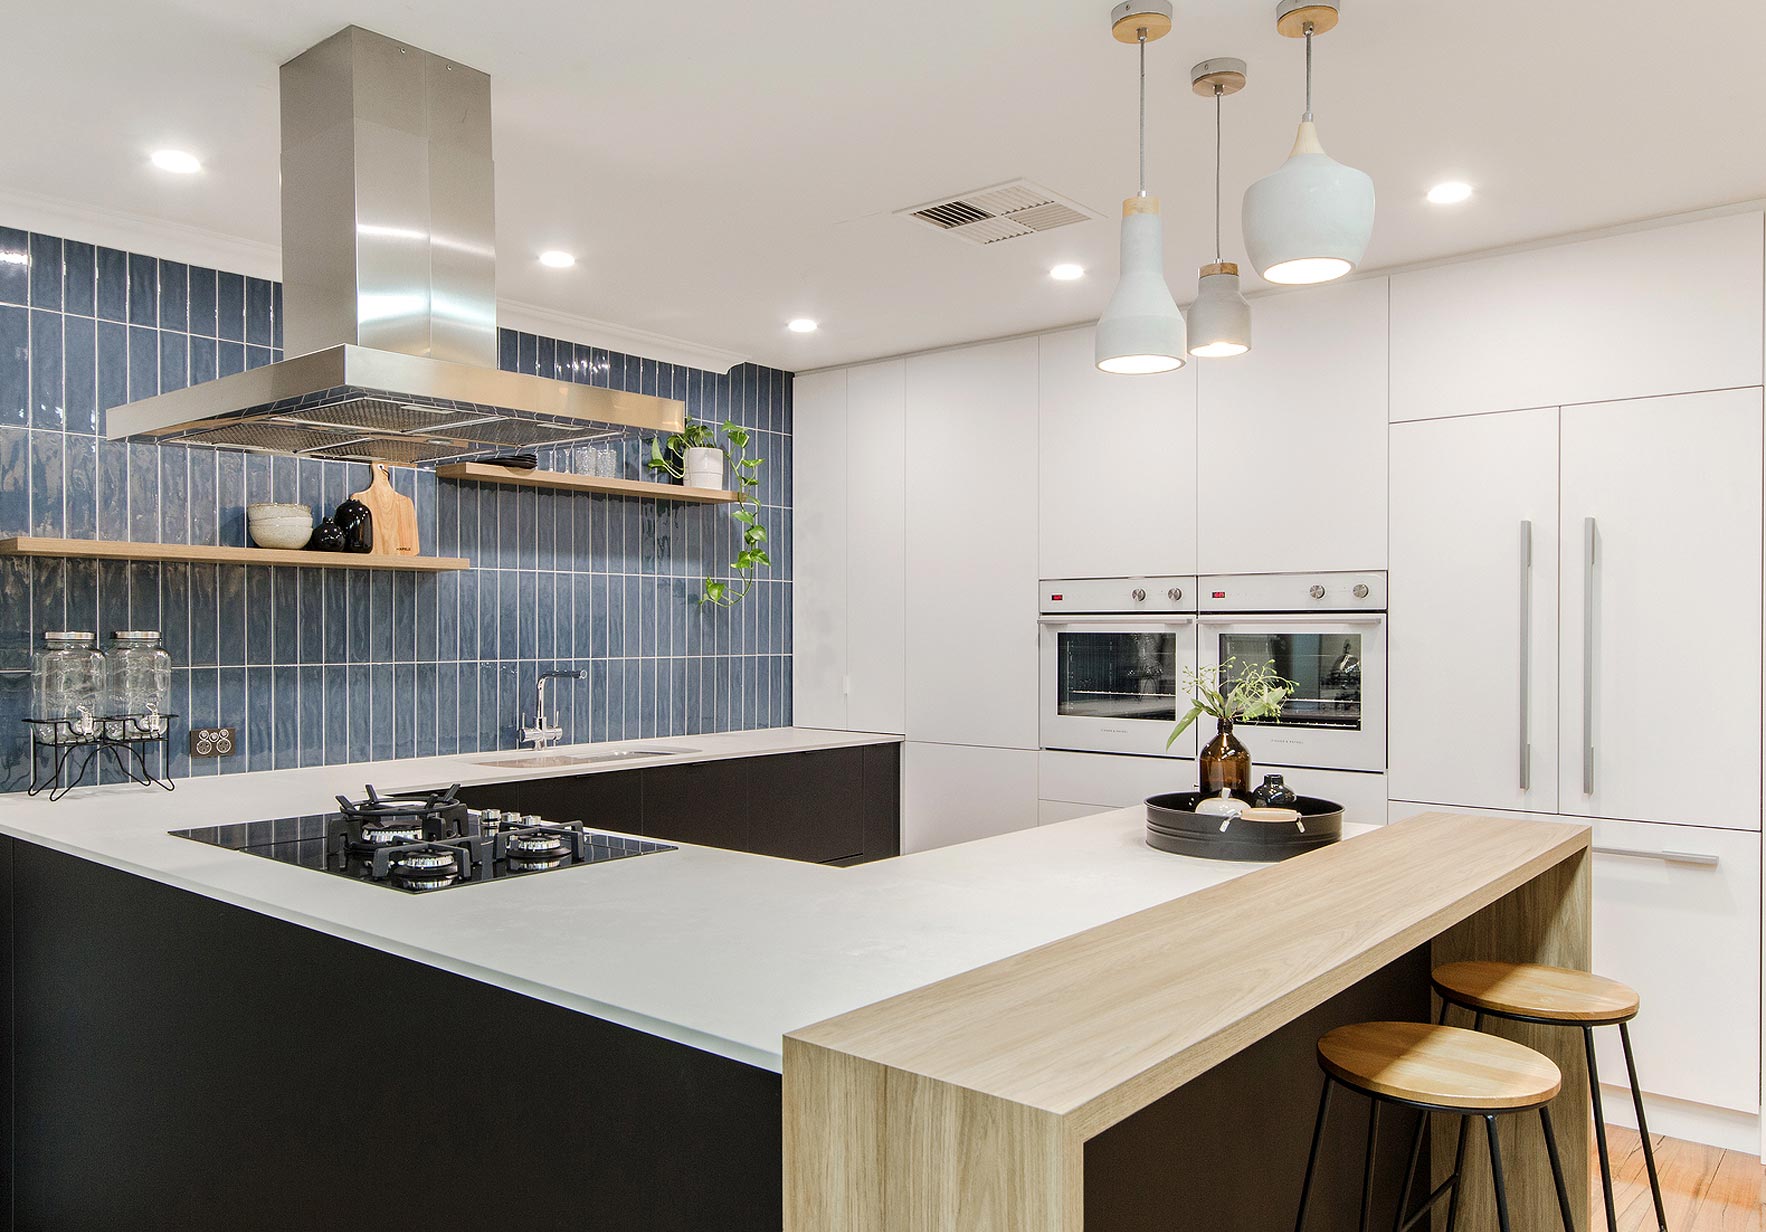 10 Ways I Balance Practicality And Style In A Kitchen When I’m Designing